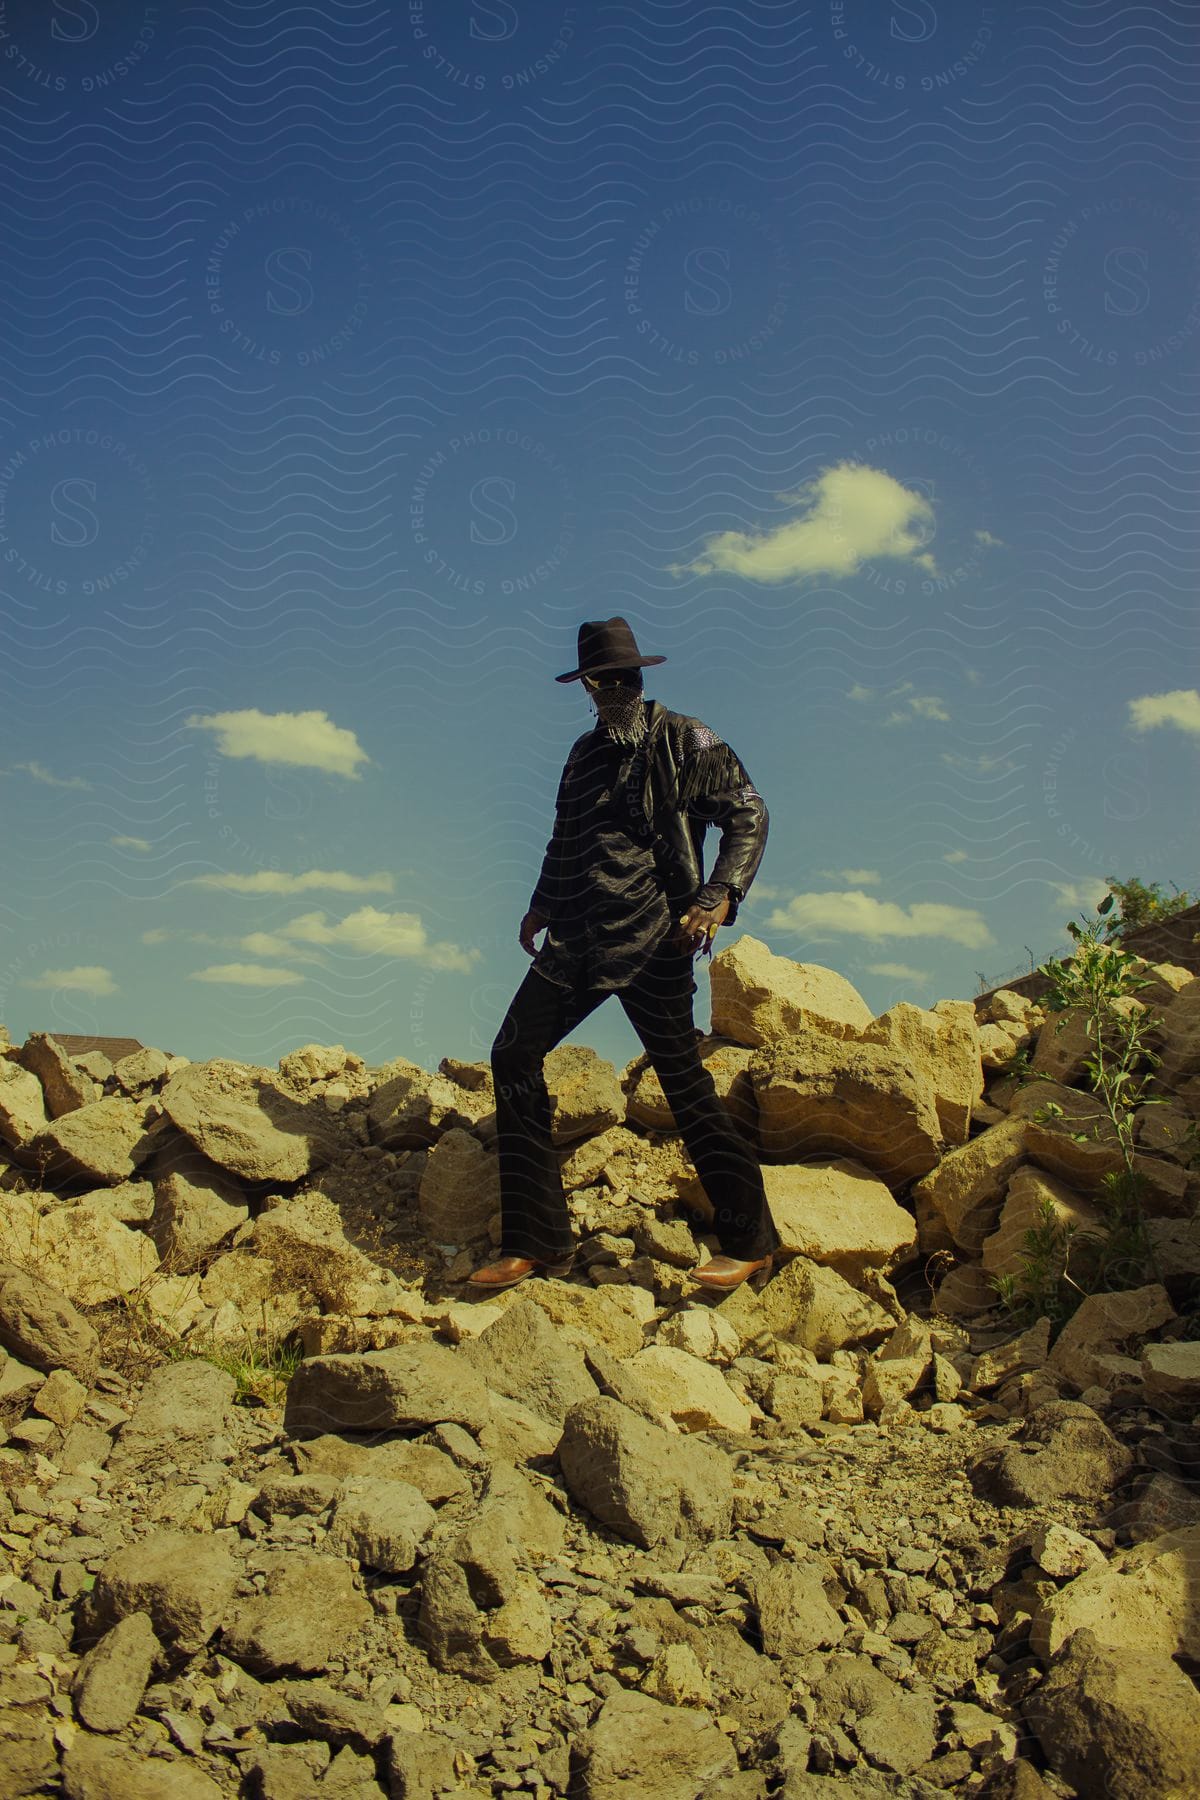 Man with brown boots and black clothing including a hat posing on top of rocks in an open-air environment